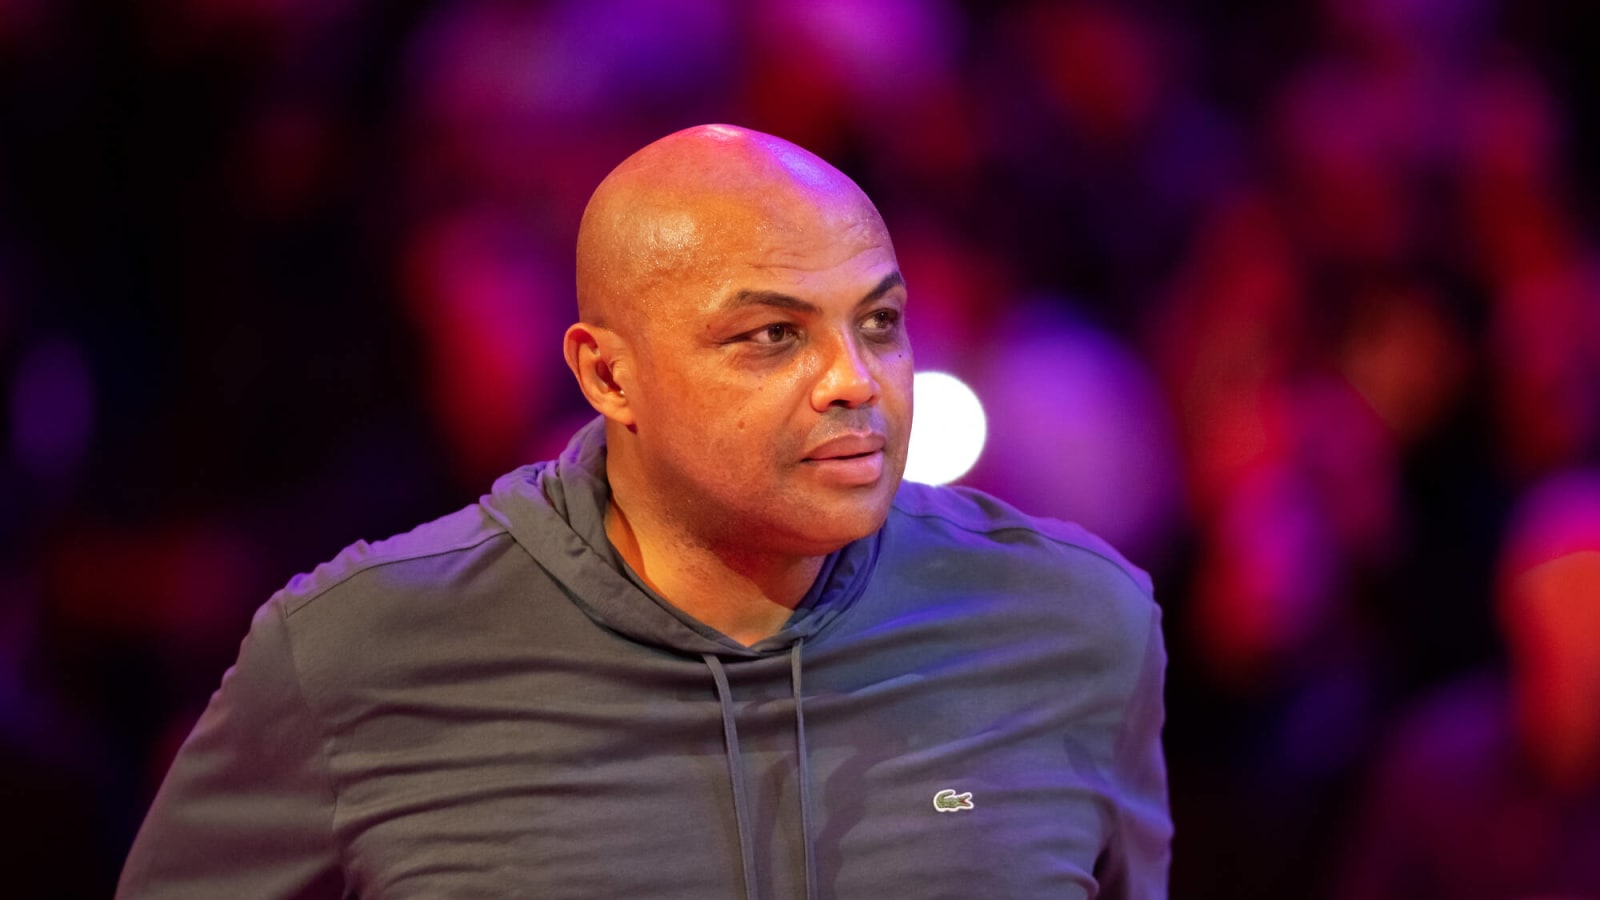 'I was going to be on LinkedIn…' Charles Barkley yet again jokes about end of Inside the NBA during live broadcast